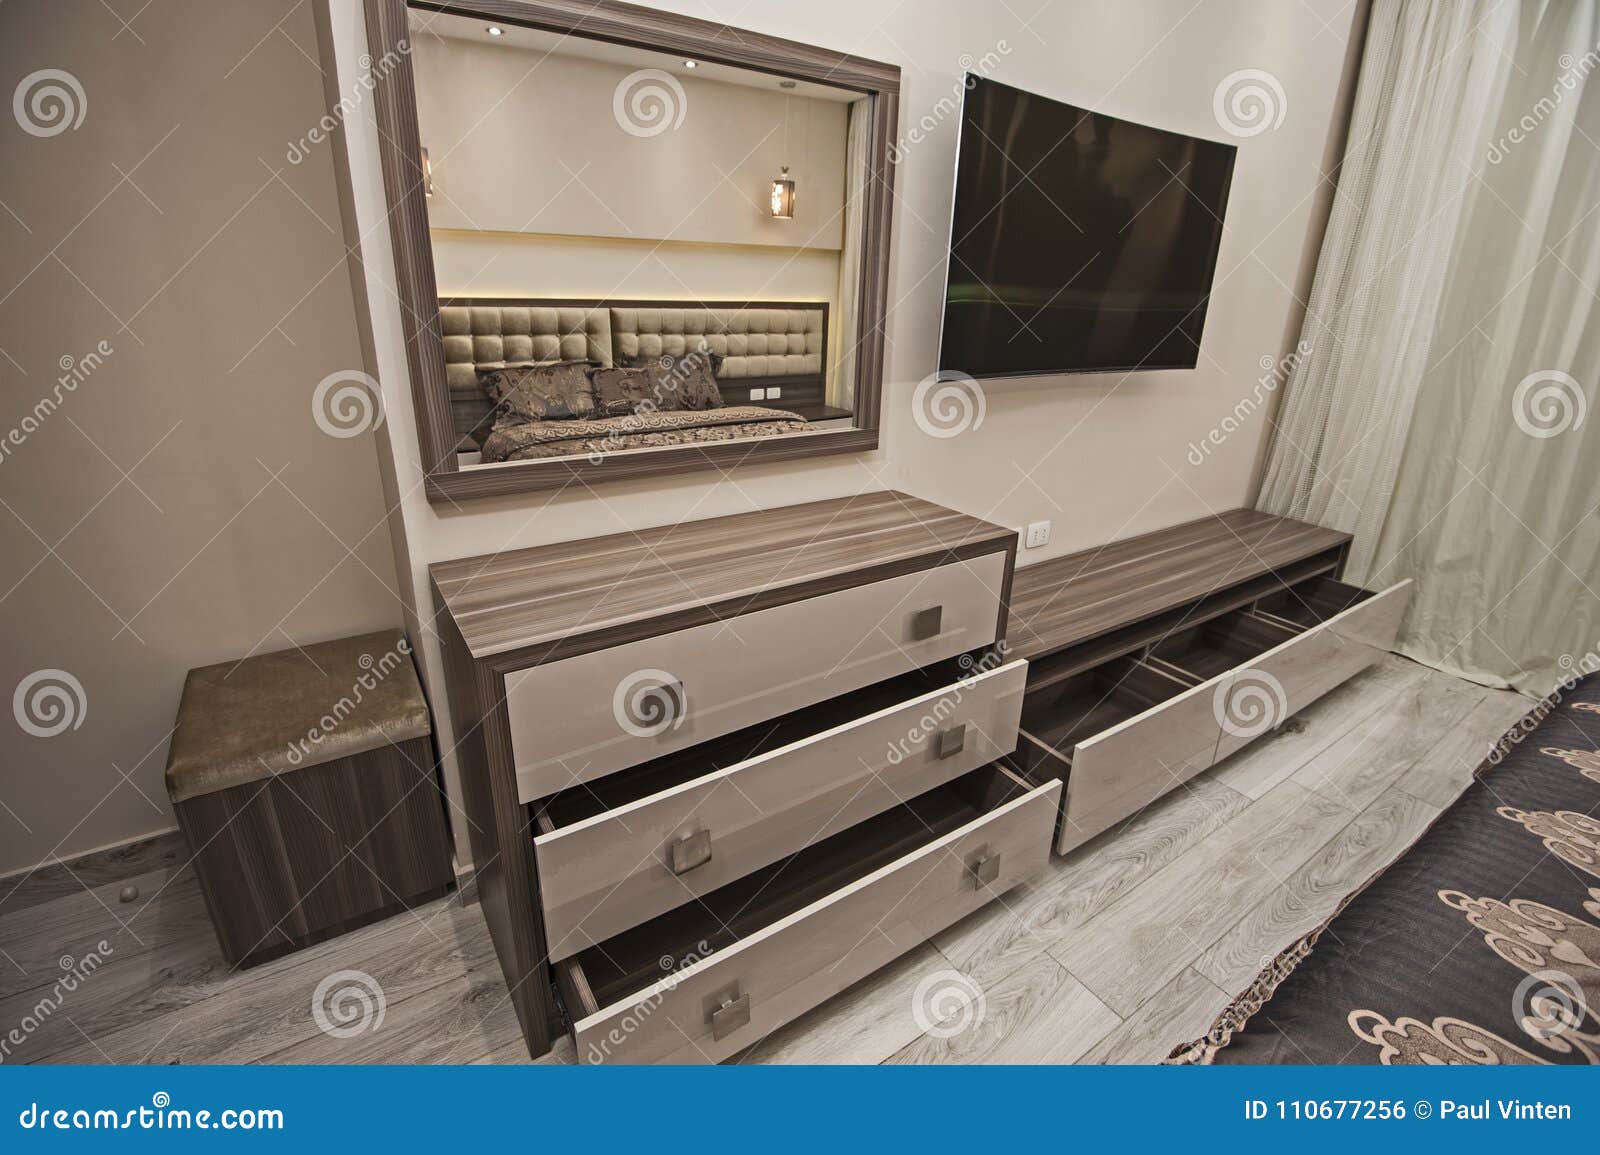 Dressing Table Chest Of Drawers In Apartment Bedroom Stock Photo